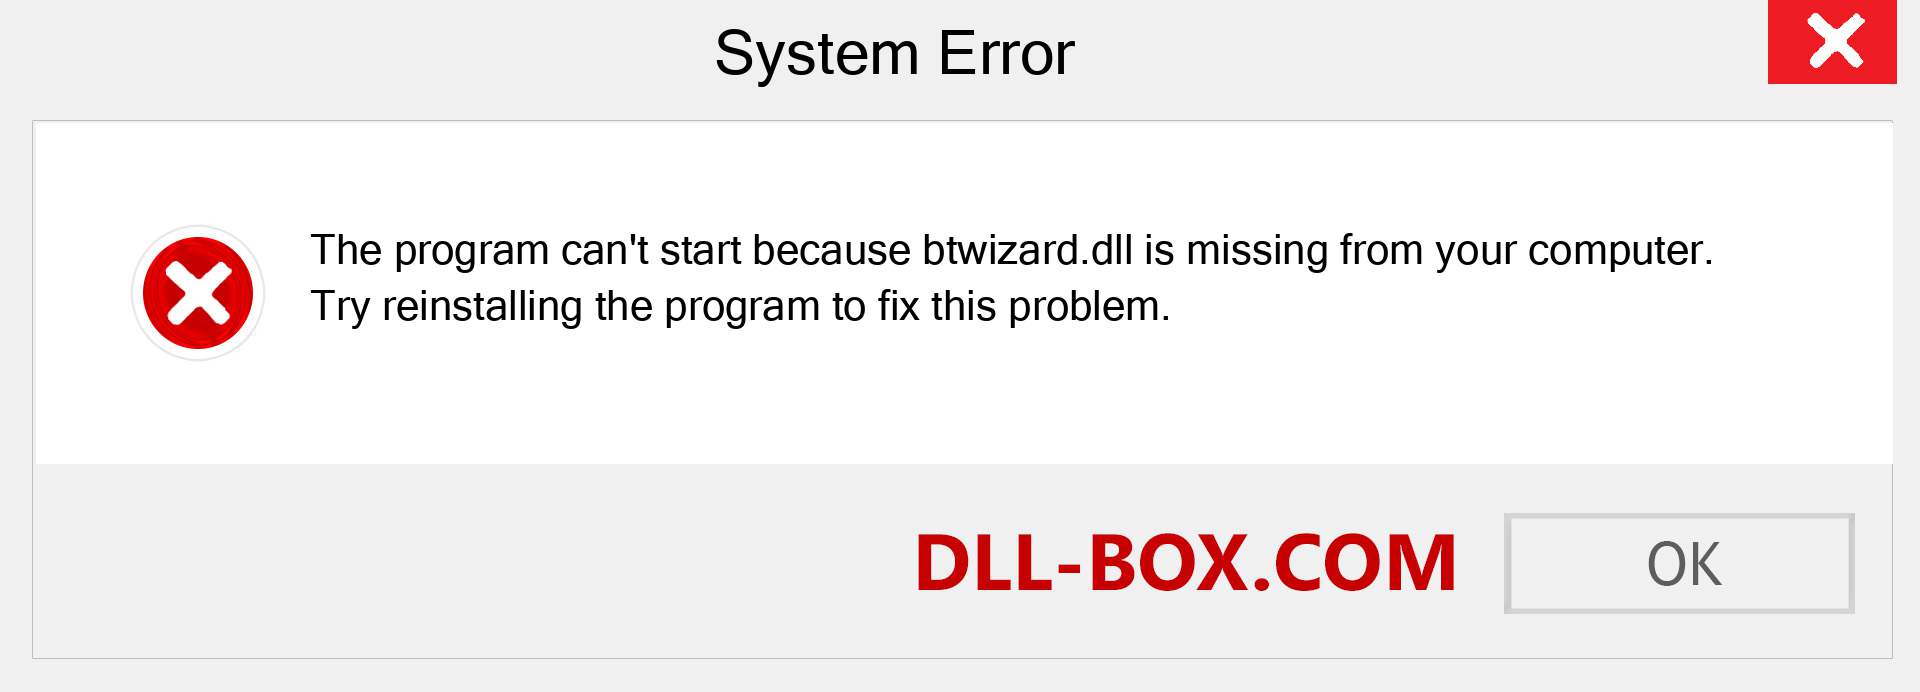  btwizard.dll file is missing?. Download for Windows 7, 8, 10 - Fix  btwizard dll Missing Error on Windows, photos, images